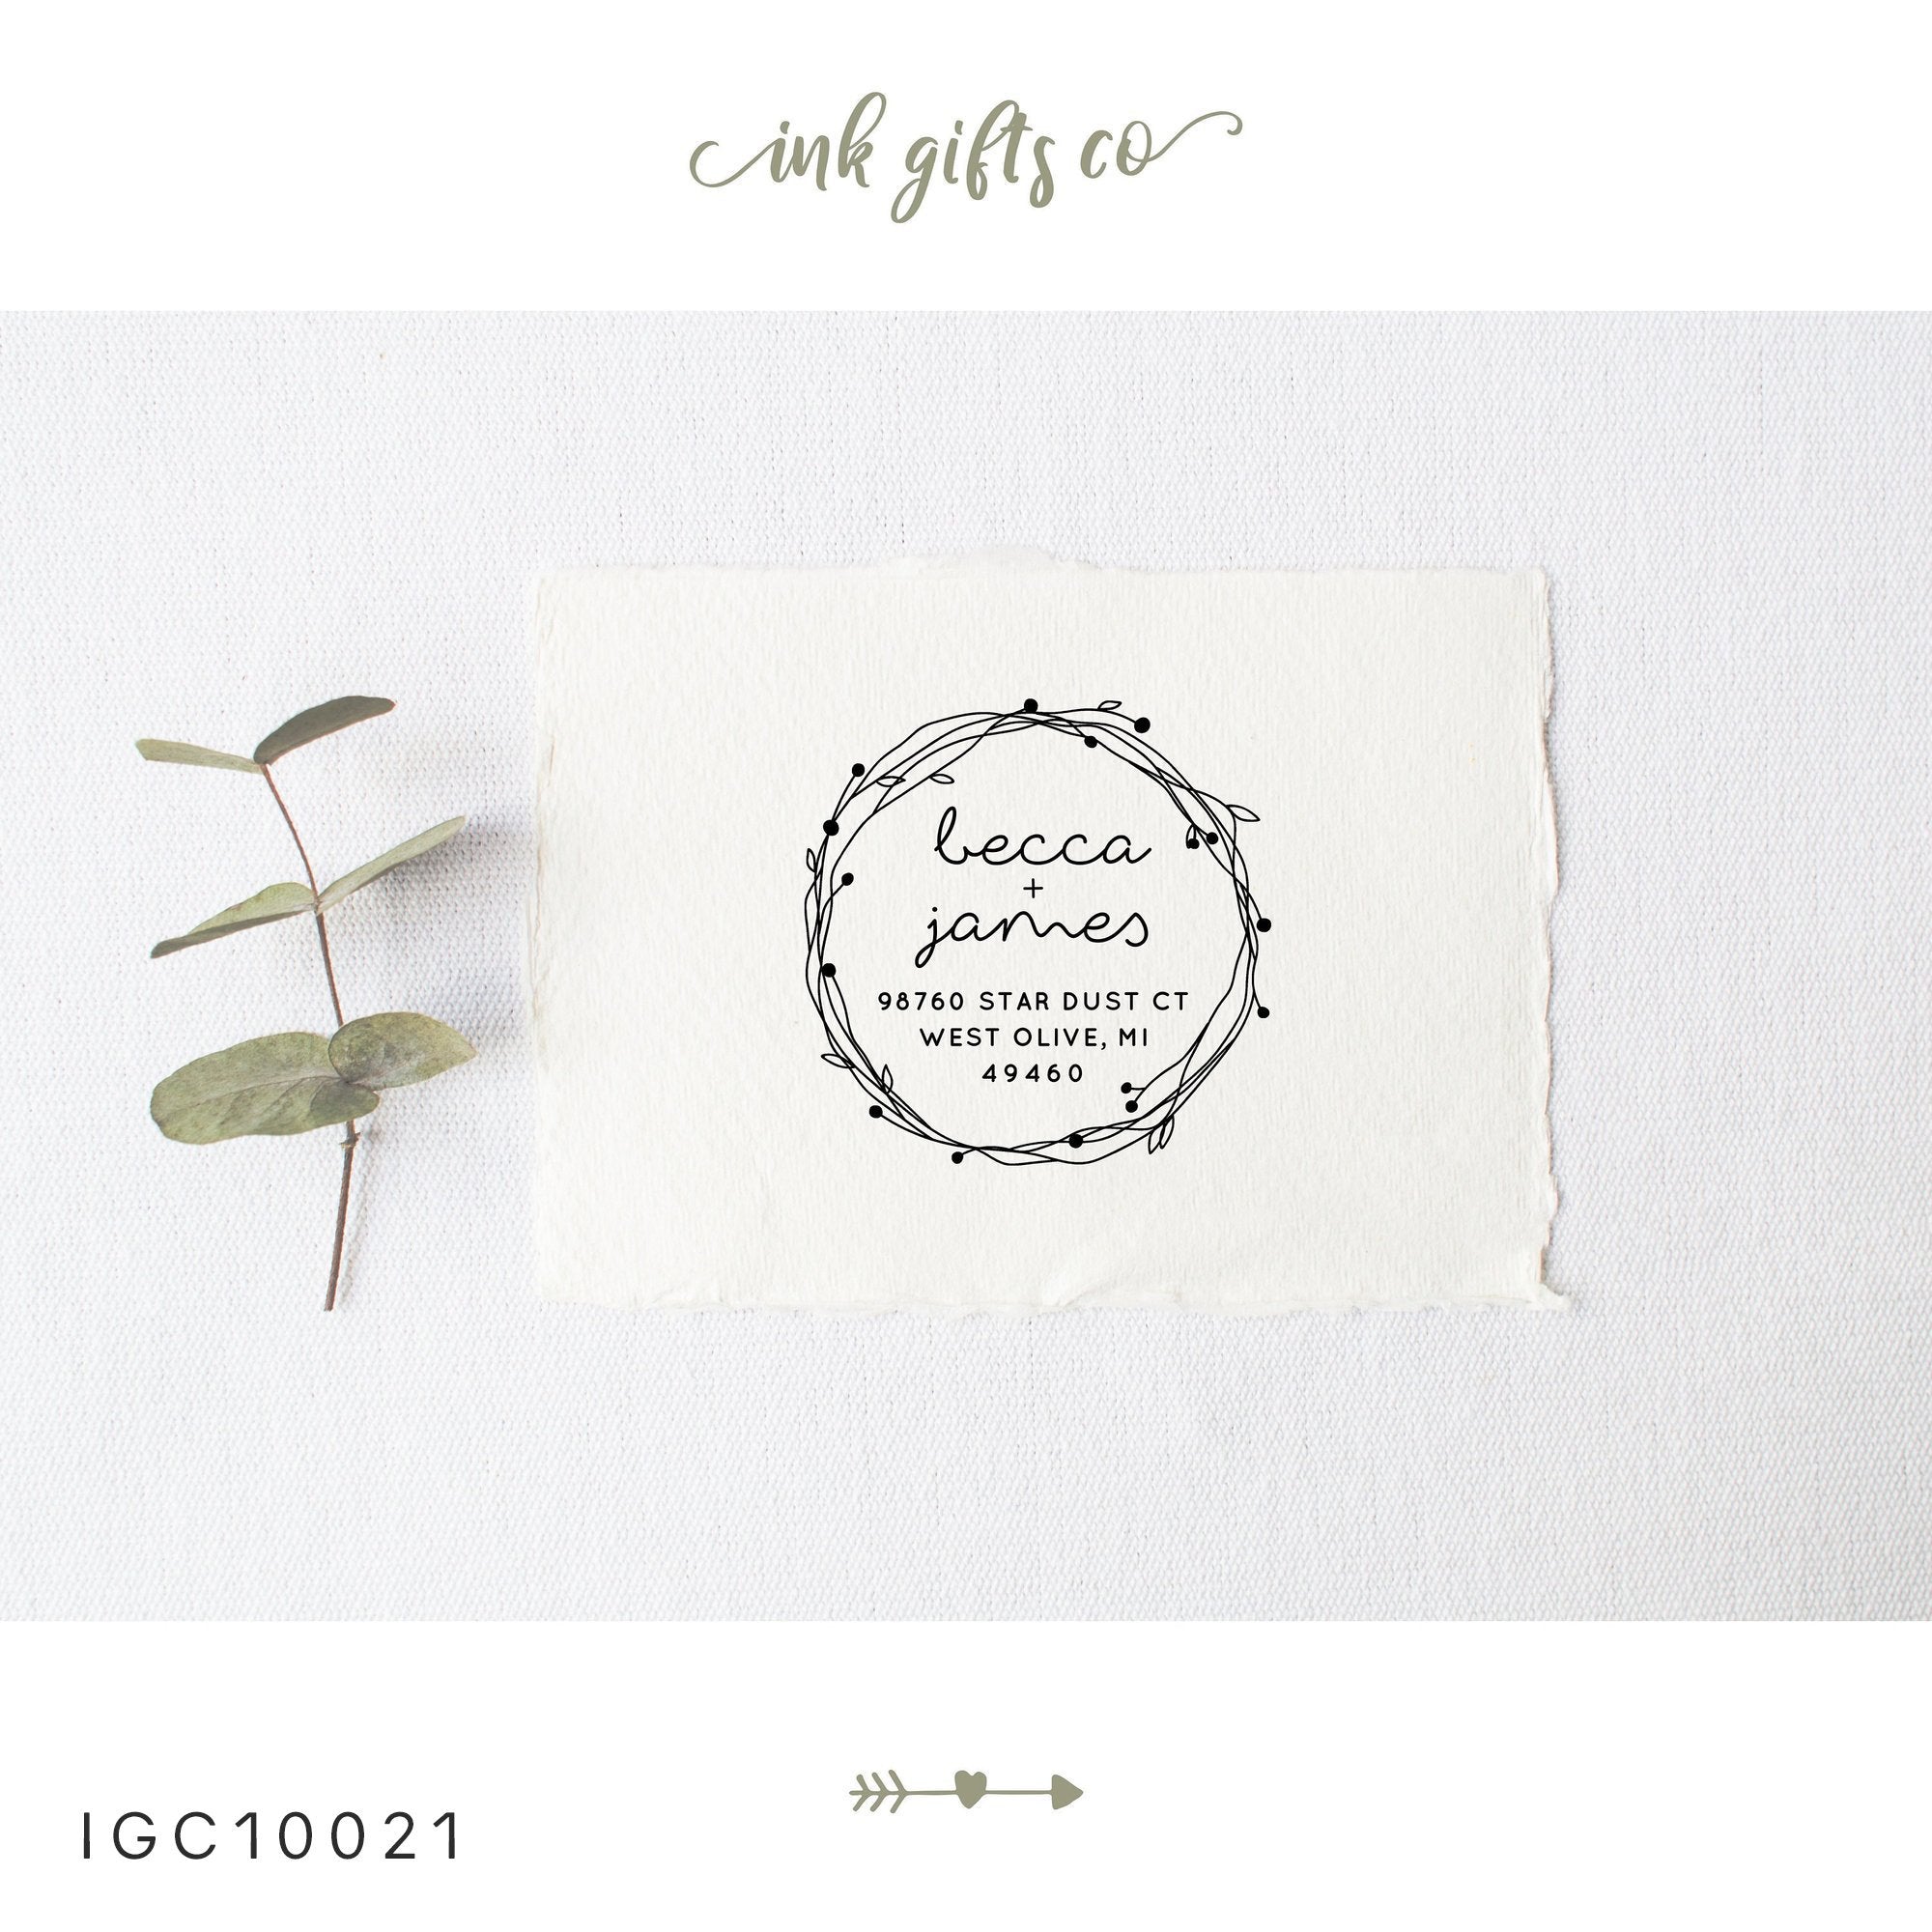 Return Address Stamp, Personalized Gift, Wedding Invitation, Pre Inked, Self Inking, RSVP Label, Couple Gifts, IGC10021